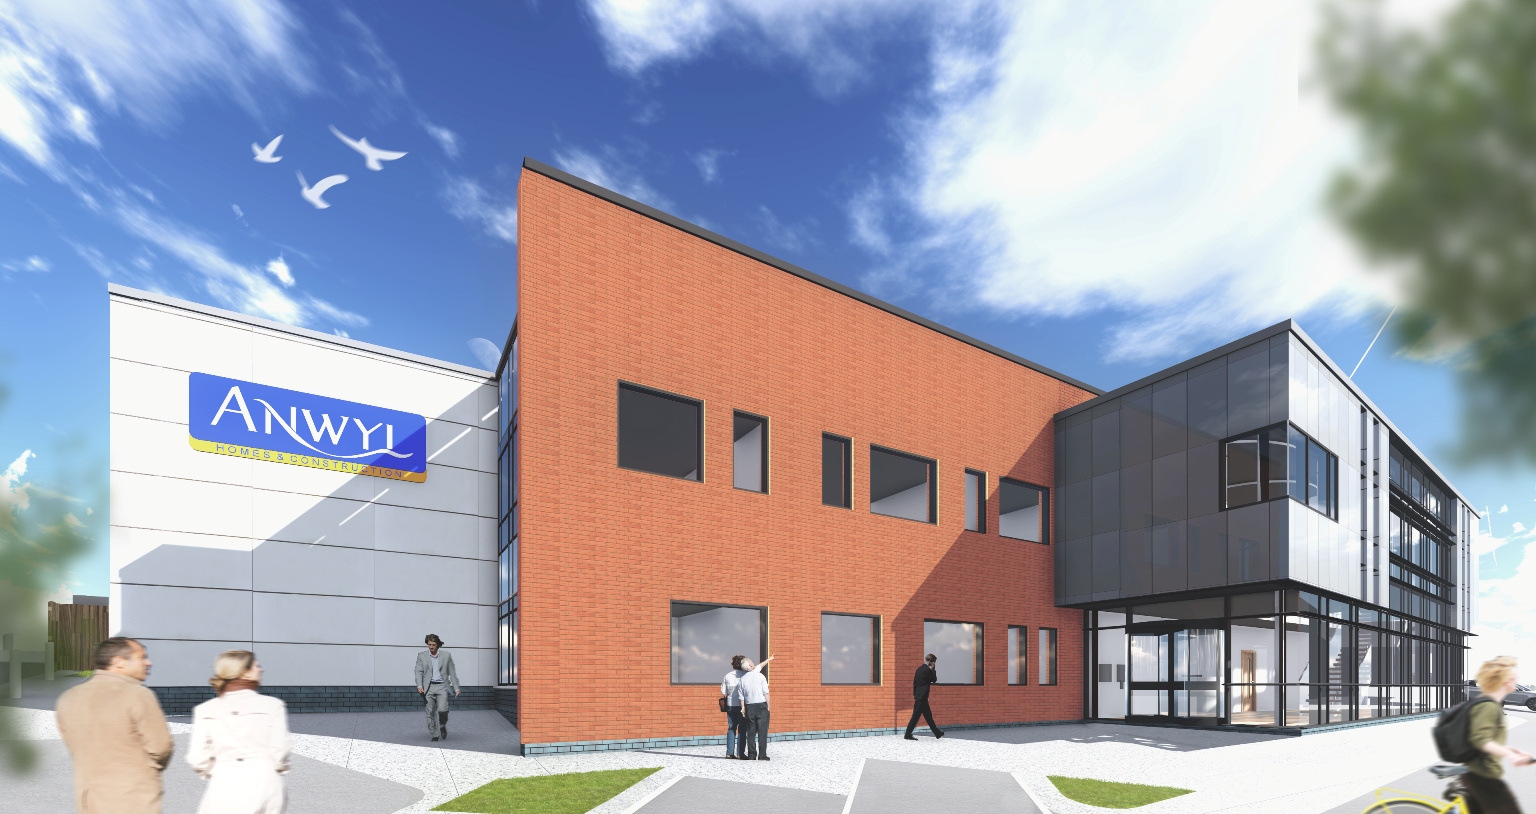 Top builder unveils plans for new HQ on the A55